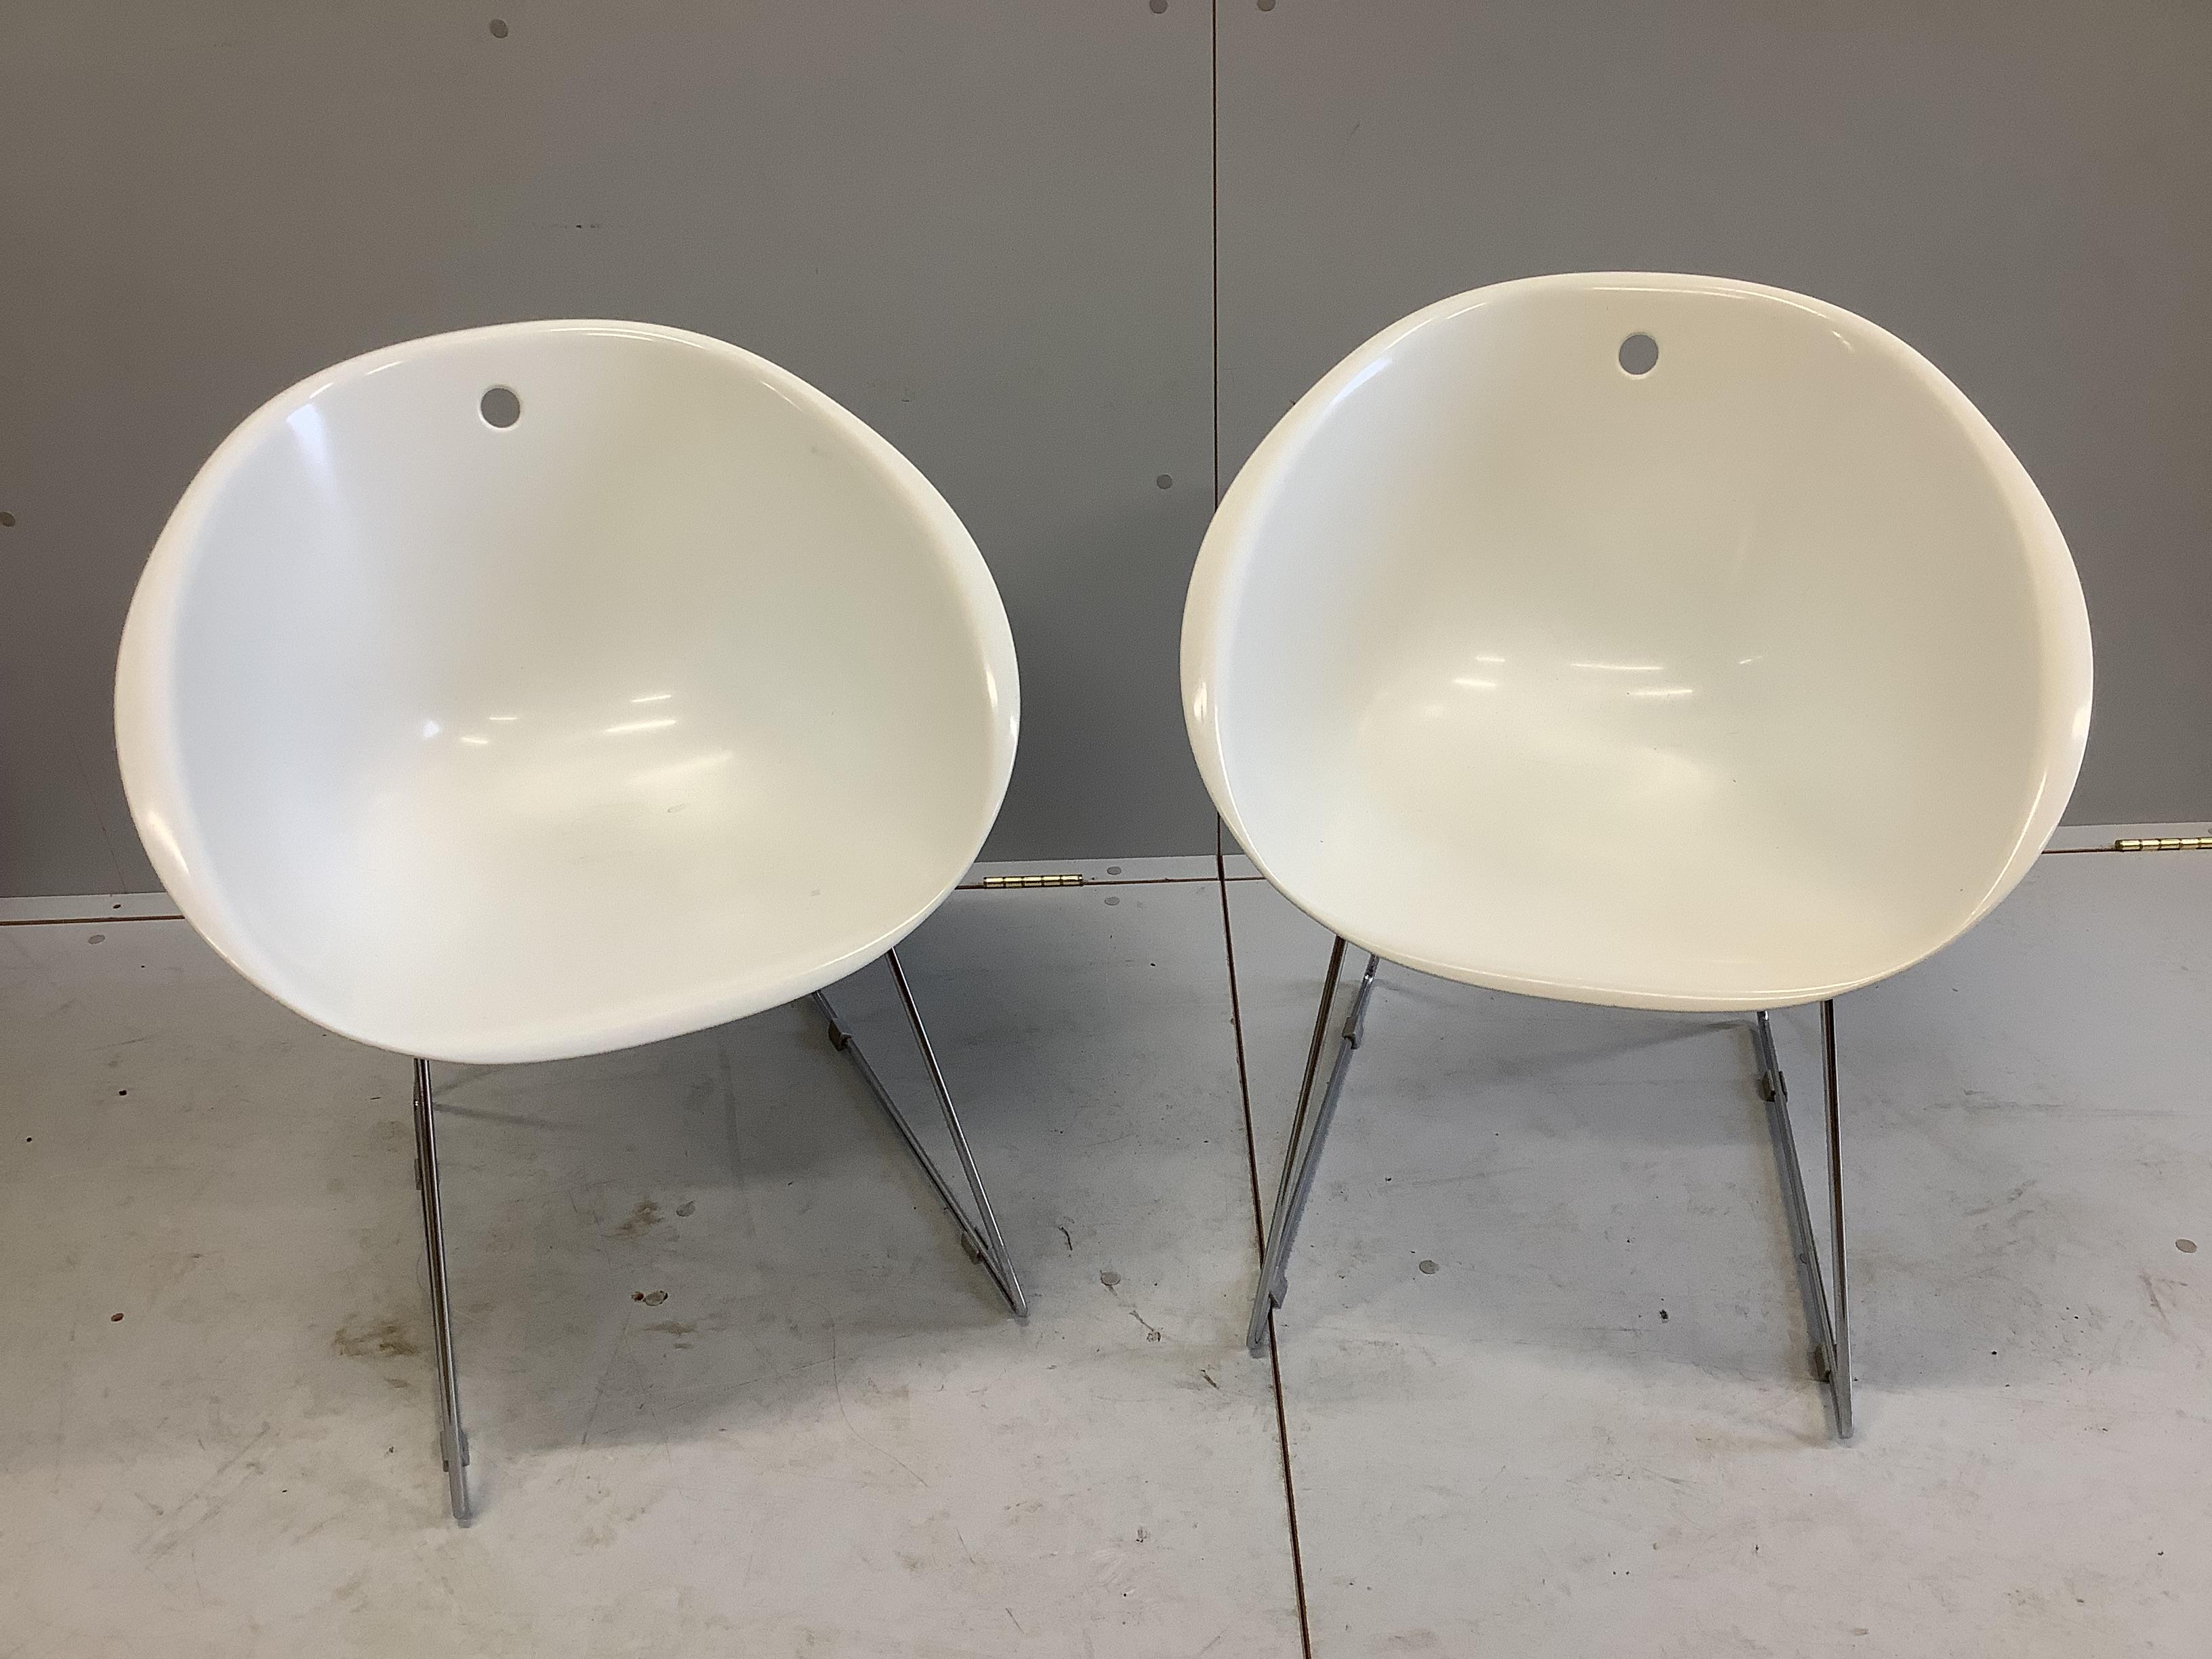 A pair of early 2000's Italian Pedrali chairs, width 58cm, depth 44cm, height 71cm